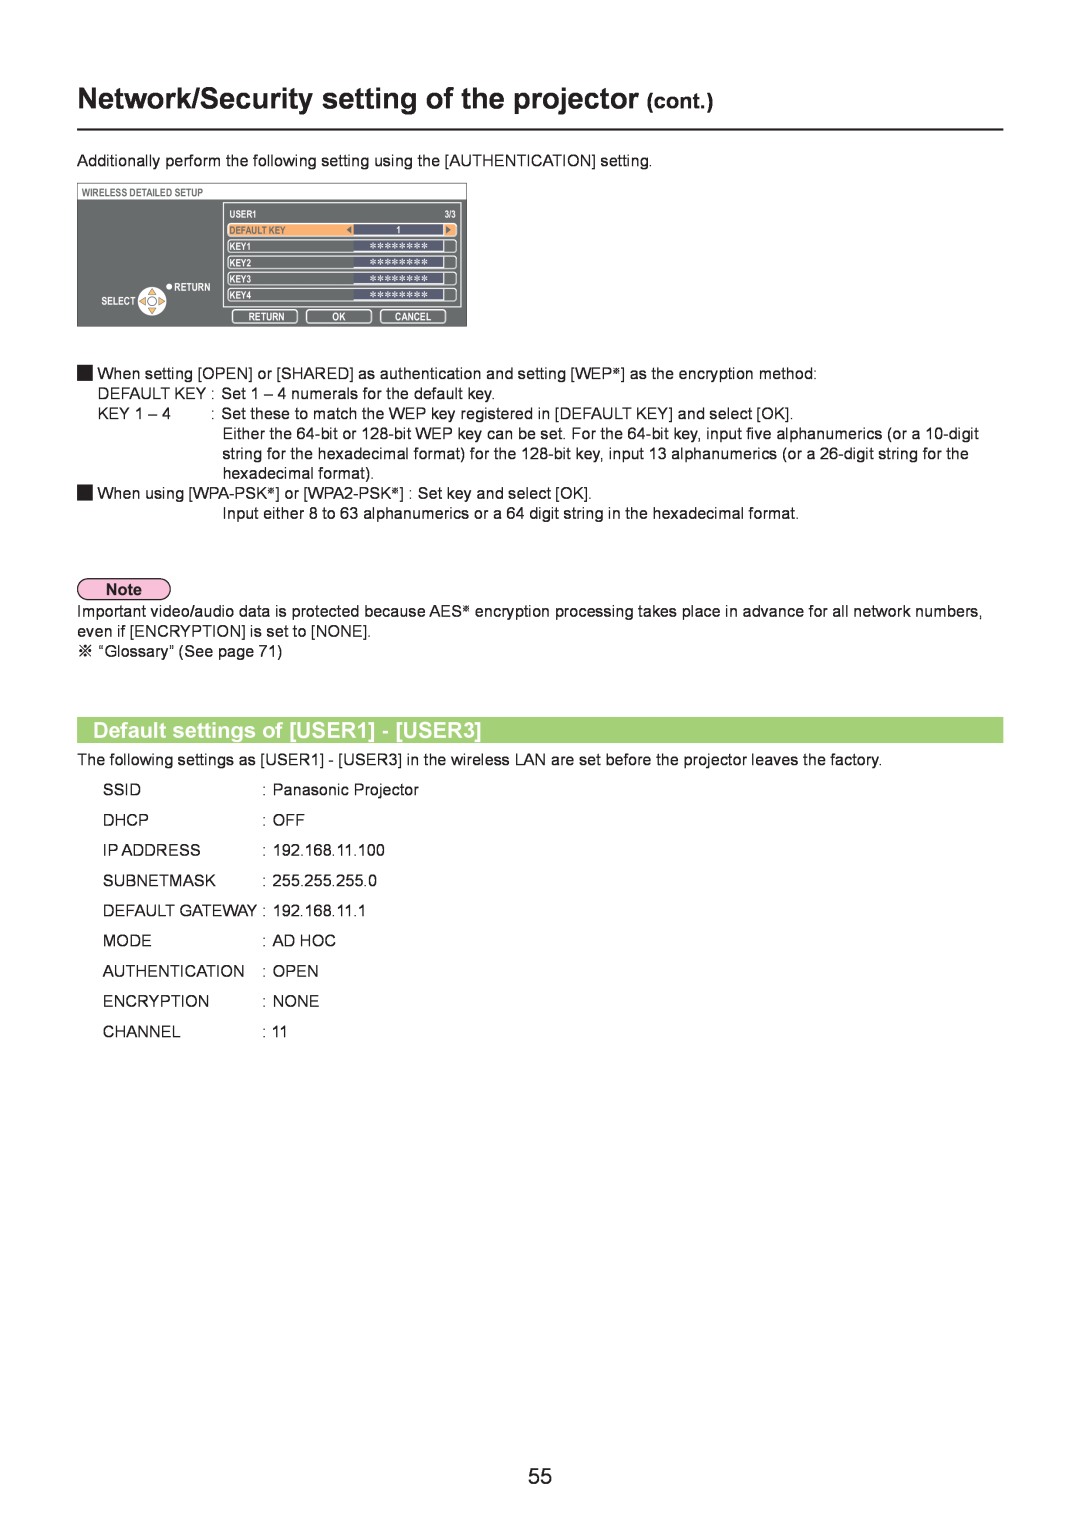 Panasonic TQBH0205-4 operation manual Default settings of USER1 - USER3, Network/Security setting of the projector cont 